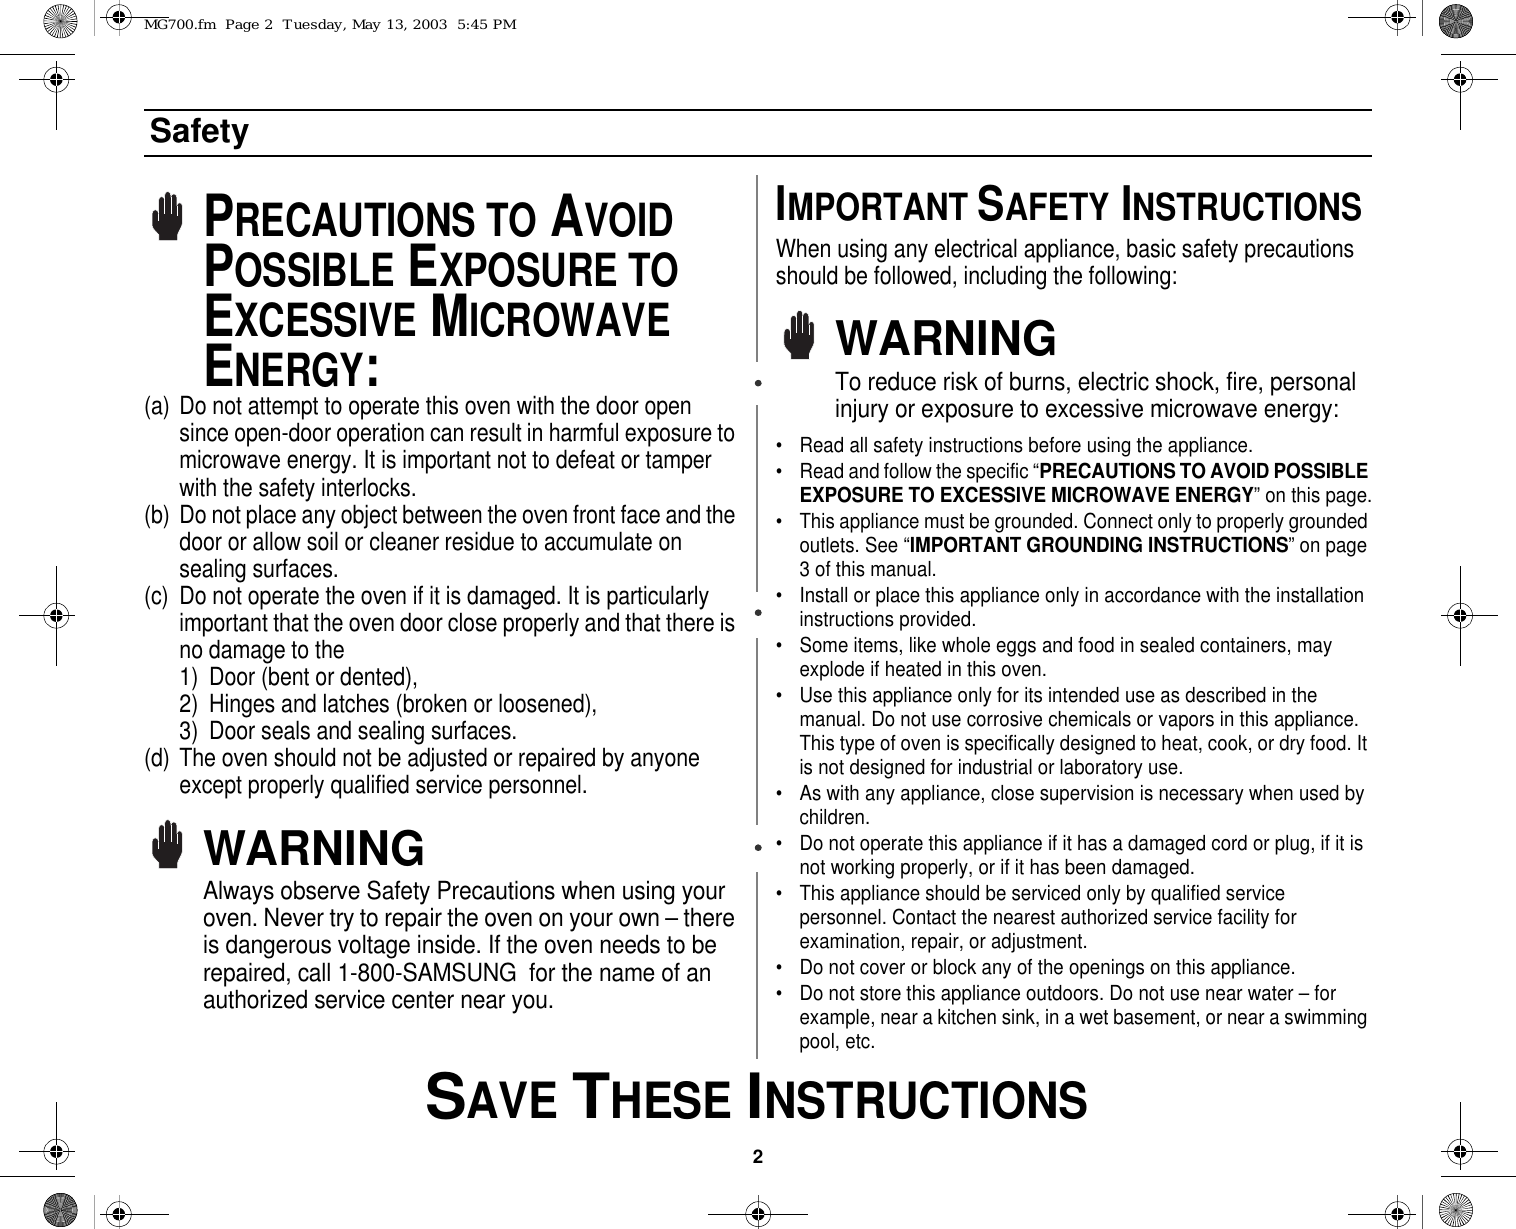 2 SAVE THESE INSTRUCTIONSSafetyPRECAUTIONS TO AVOID POSSIBLE EXPOSURE TO EXCESSIVE MICROWAVE ENERGY:(a) Do not attempt to operate this oven with the door open since open-door operation can result in harmful exposure to microwave energy. It is important not to defeat or tamper with the safety interlocks.(b) Do not place any object between the oven front face and the door or allow soil or cleaner residue to accumulate on sealing surfaces.(c) Do not operate the oven if it is damaged. It is particularly important that the oven door close properly and that there is no damage to the 1) Door (bent or dented), 2) Hinges and latches (broken or loosened), 3) Door seals and sealing surfaces.(d) The oven should not be adjusted or repaired by anyone except properly qualified service personnel.WARNINGAlways observe Safety Precautions when using your oven. Never try to repair the oven on your own – there is dangerous voltage inside. If the oven needs to be repaired, call 1-800-SAMSUNG  for the name of an authorized service center near you.IMPORTANT SAFETY INSTRUCTIONSWhen using any electrical appliance, basic safety precautions should be followed, including the following:WARNINGTo reduce risk of burns, electric shock, fire, personal injury or exposure to excessive microwave energy:• Read all safety instructions before using the appliance.• Read and follow the specific “PRECAUTIONS TO AVOID POSSIBLE EXPOSURE TO EXCESSIVE MICROWAVE ENERGY” on this page.• This appliance must be grounded. Connect only to properly grounded outlets. See “IMPORTANT GROUNDING INSTRUCTIONS” on page 3 of this manual. • Install or place this appliance only in accordance with the installation instructions provided.• Some items, like whole eggs and food in sealed containers, may explode if heated in this oven.• Use this appliance only for its intended use as described in the manual. Do not use corrosive chemicals or vapors in this appliance. This type of oven is specifically designed to heat, cook, or dry food. It is not designed for industrial or laboratory use.• As with any appliance, close supervision is necessary when used by children.• Do not operate this appliance if it has a damaged cord or plug, if it is not working properly, or if it has been damaged.• This appliance should be serviced only by qualified service personnel. Contact the nearest authorized service facility for examination, repair, or adjustment.• Do not cover or block any of the openings on this appliance.• Do not store this appliance outdoors. Do not use near water – for example, near a kitchen sink, in a wet basement, or near a swimming pool, etc. MG700.fm  Page 2  Tuesday, May 13, 2003  5:45 PM